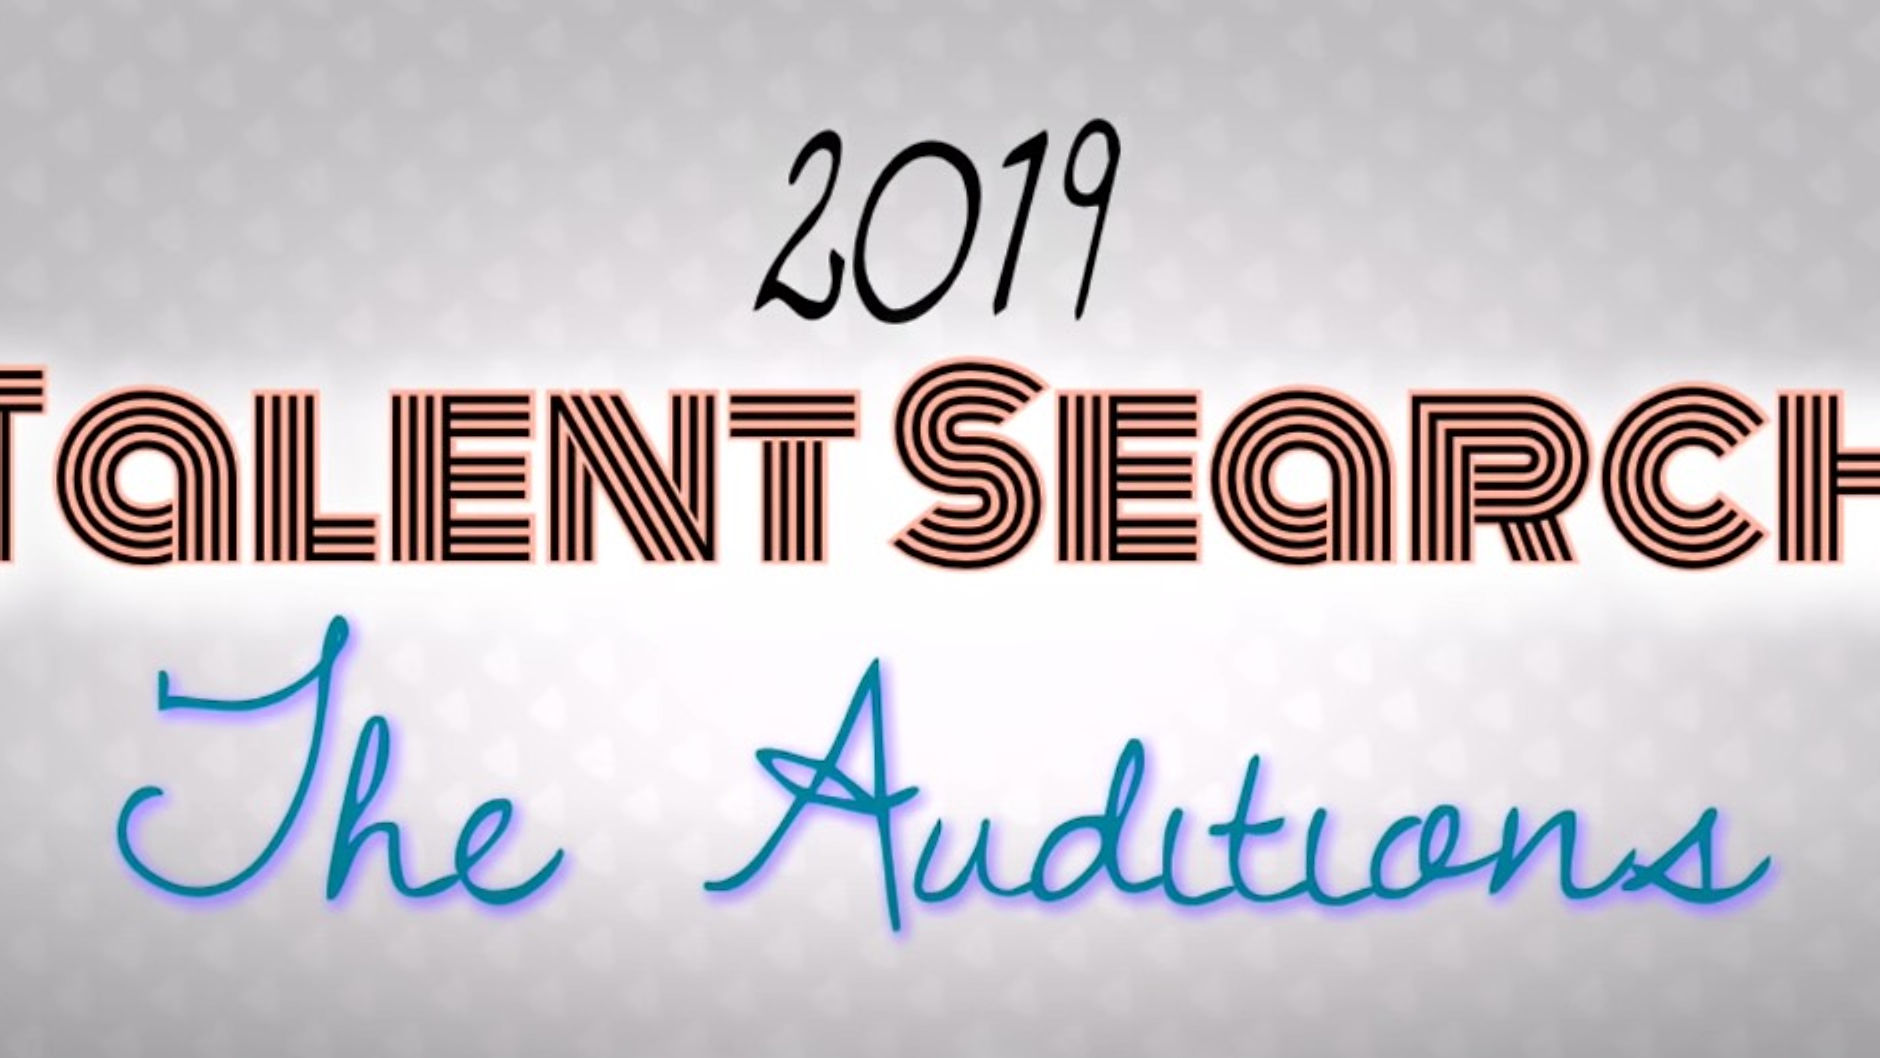 The Talent Search contest - Docu Series